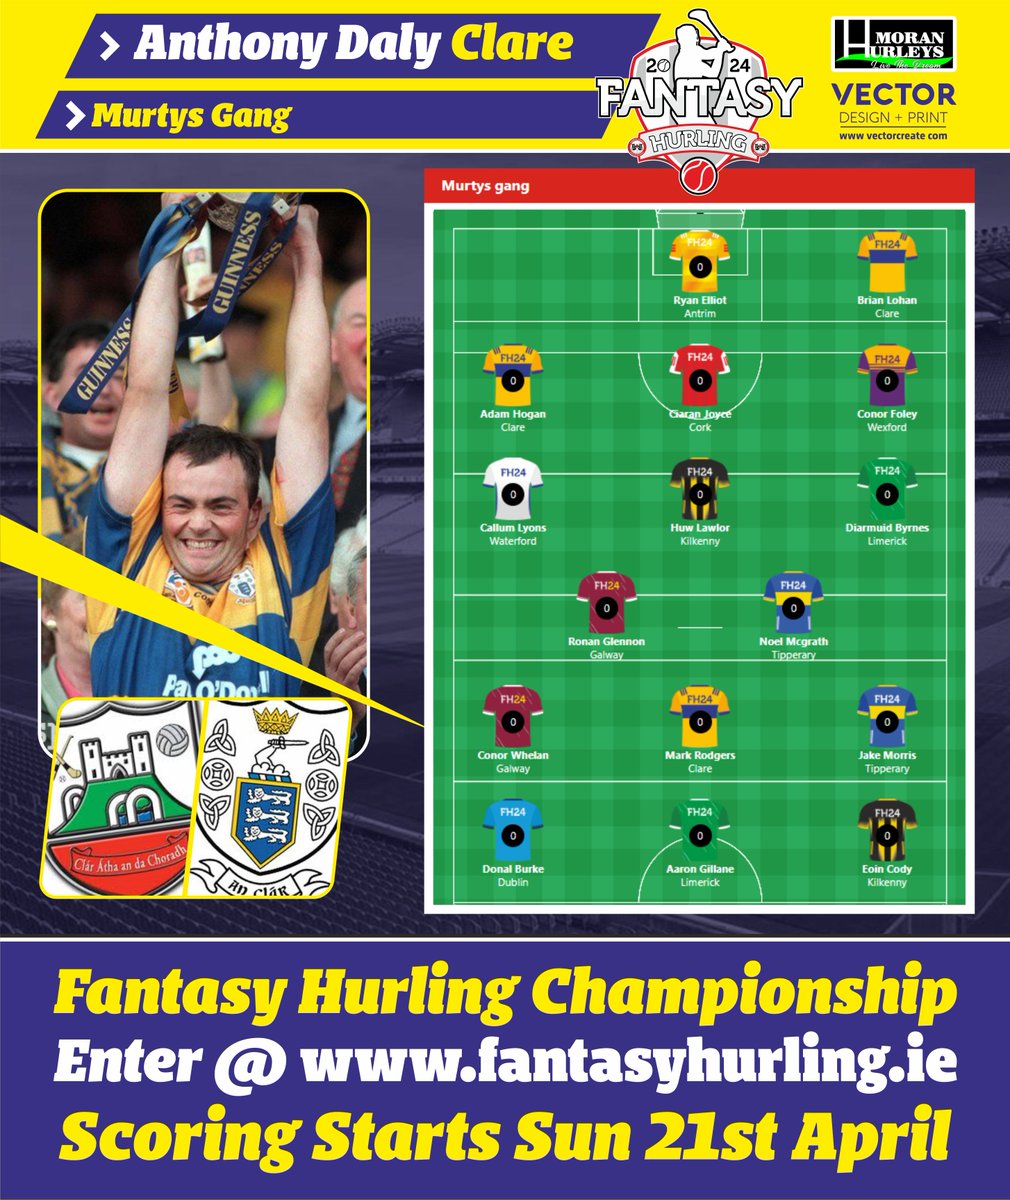 🌟📢ANNOUNCEMENT📢🌟 STRAIGHT OUT OF THE BLOCKS! @GaaClare & @ClarecastleGAA Legend @DaloAnto has his first draft in! 💪Can you beat his effort? ONLY 1 WEEK TO GO! 📲 Enter @ championship.fantasyhurling.ie